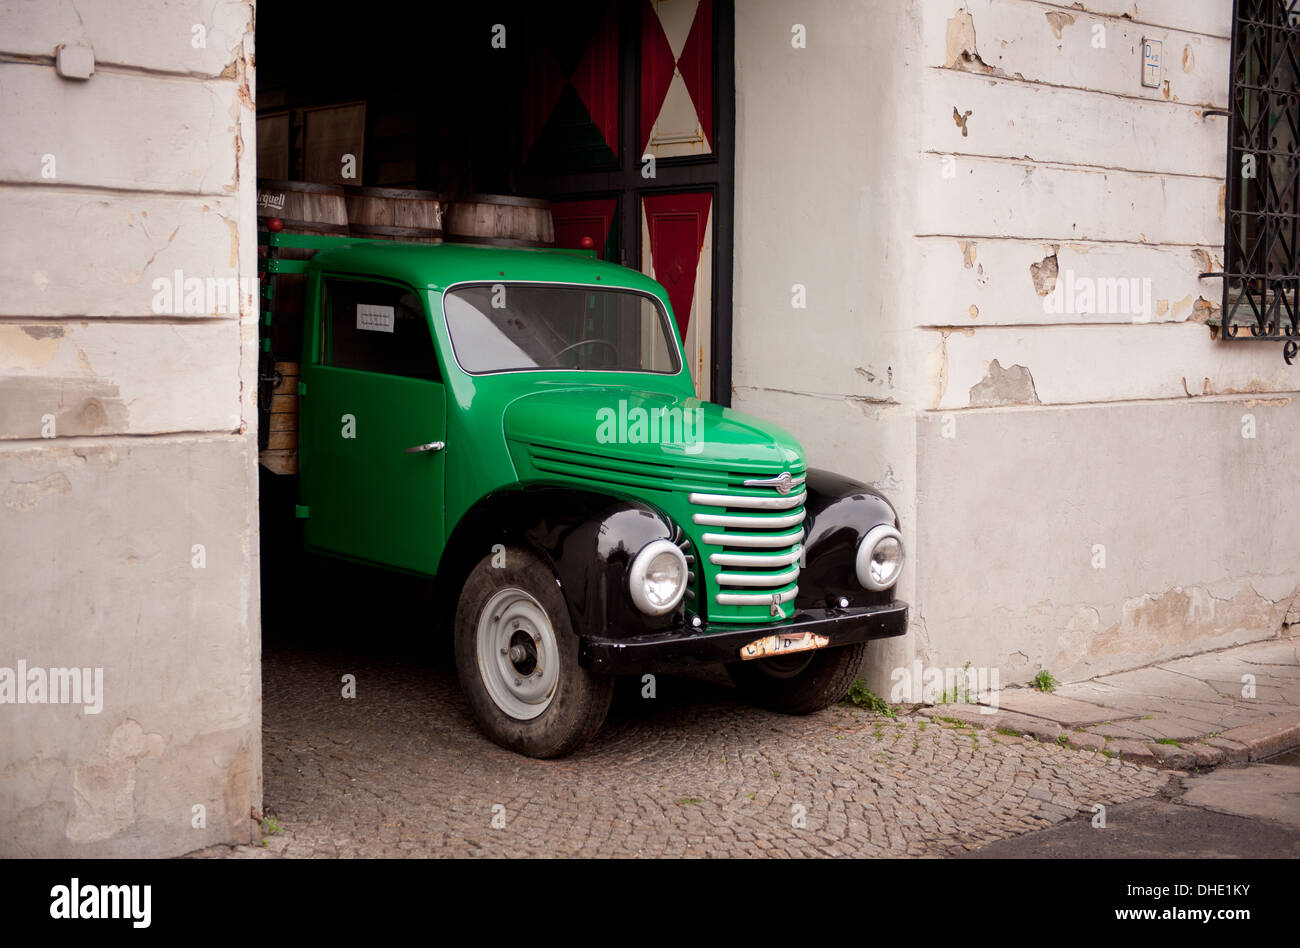 Vintage green and black car in entrance Stock Photo